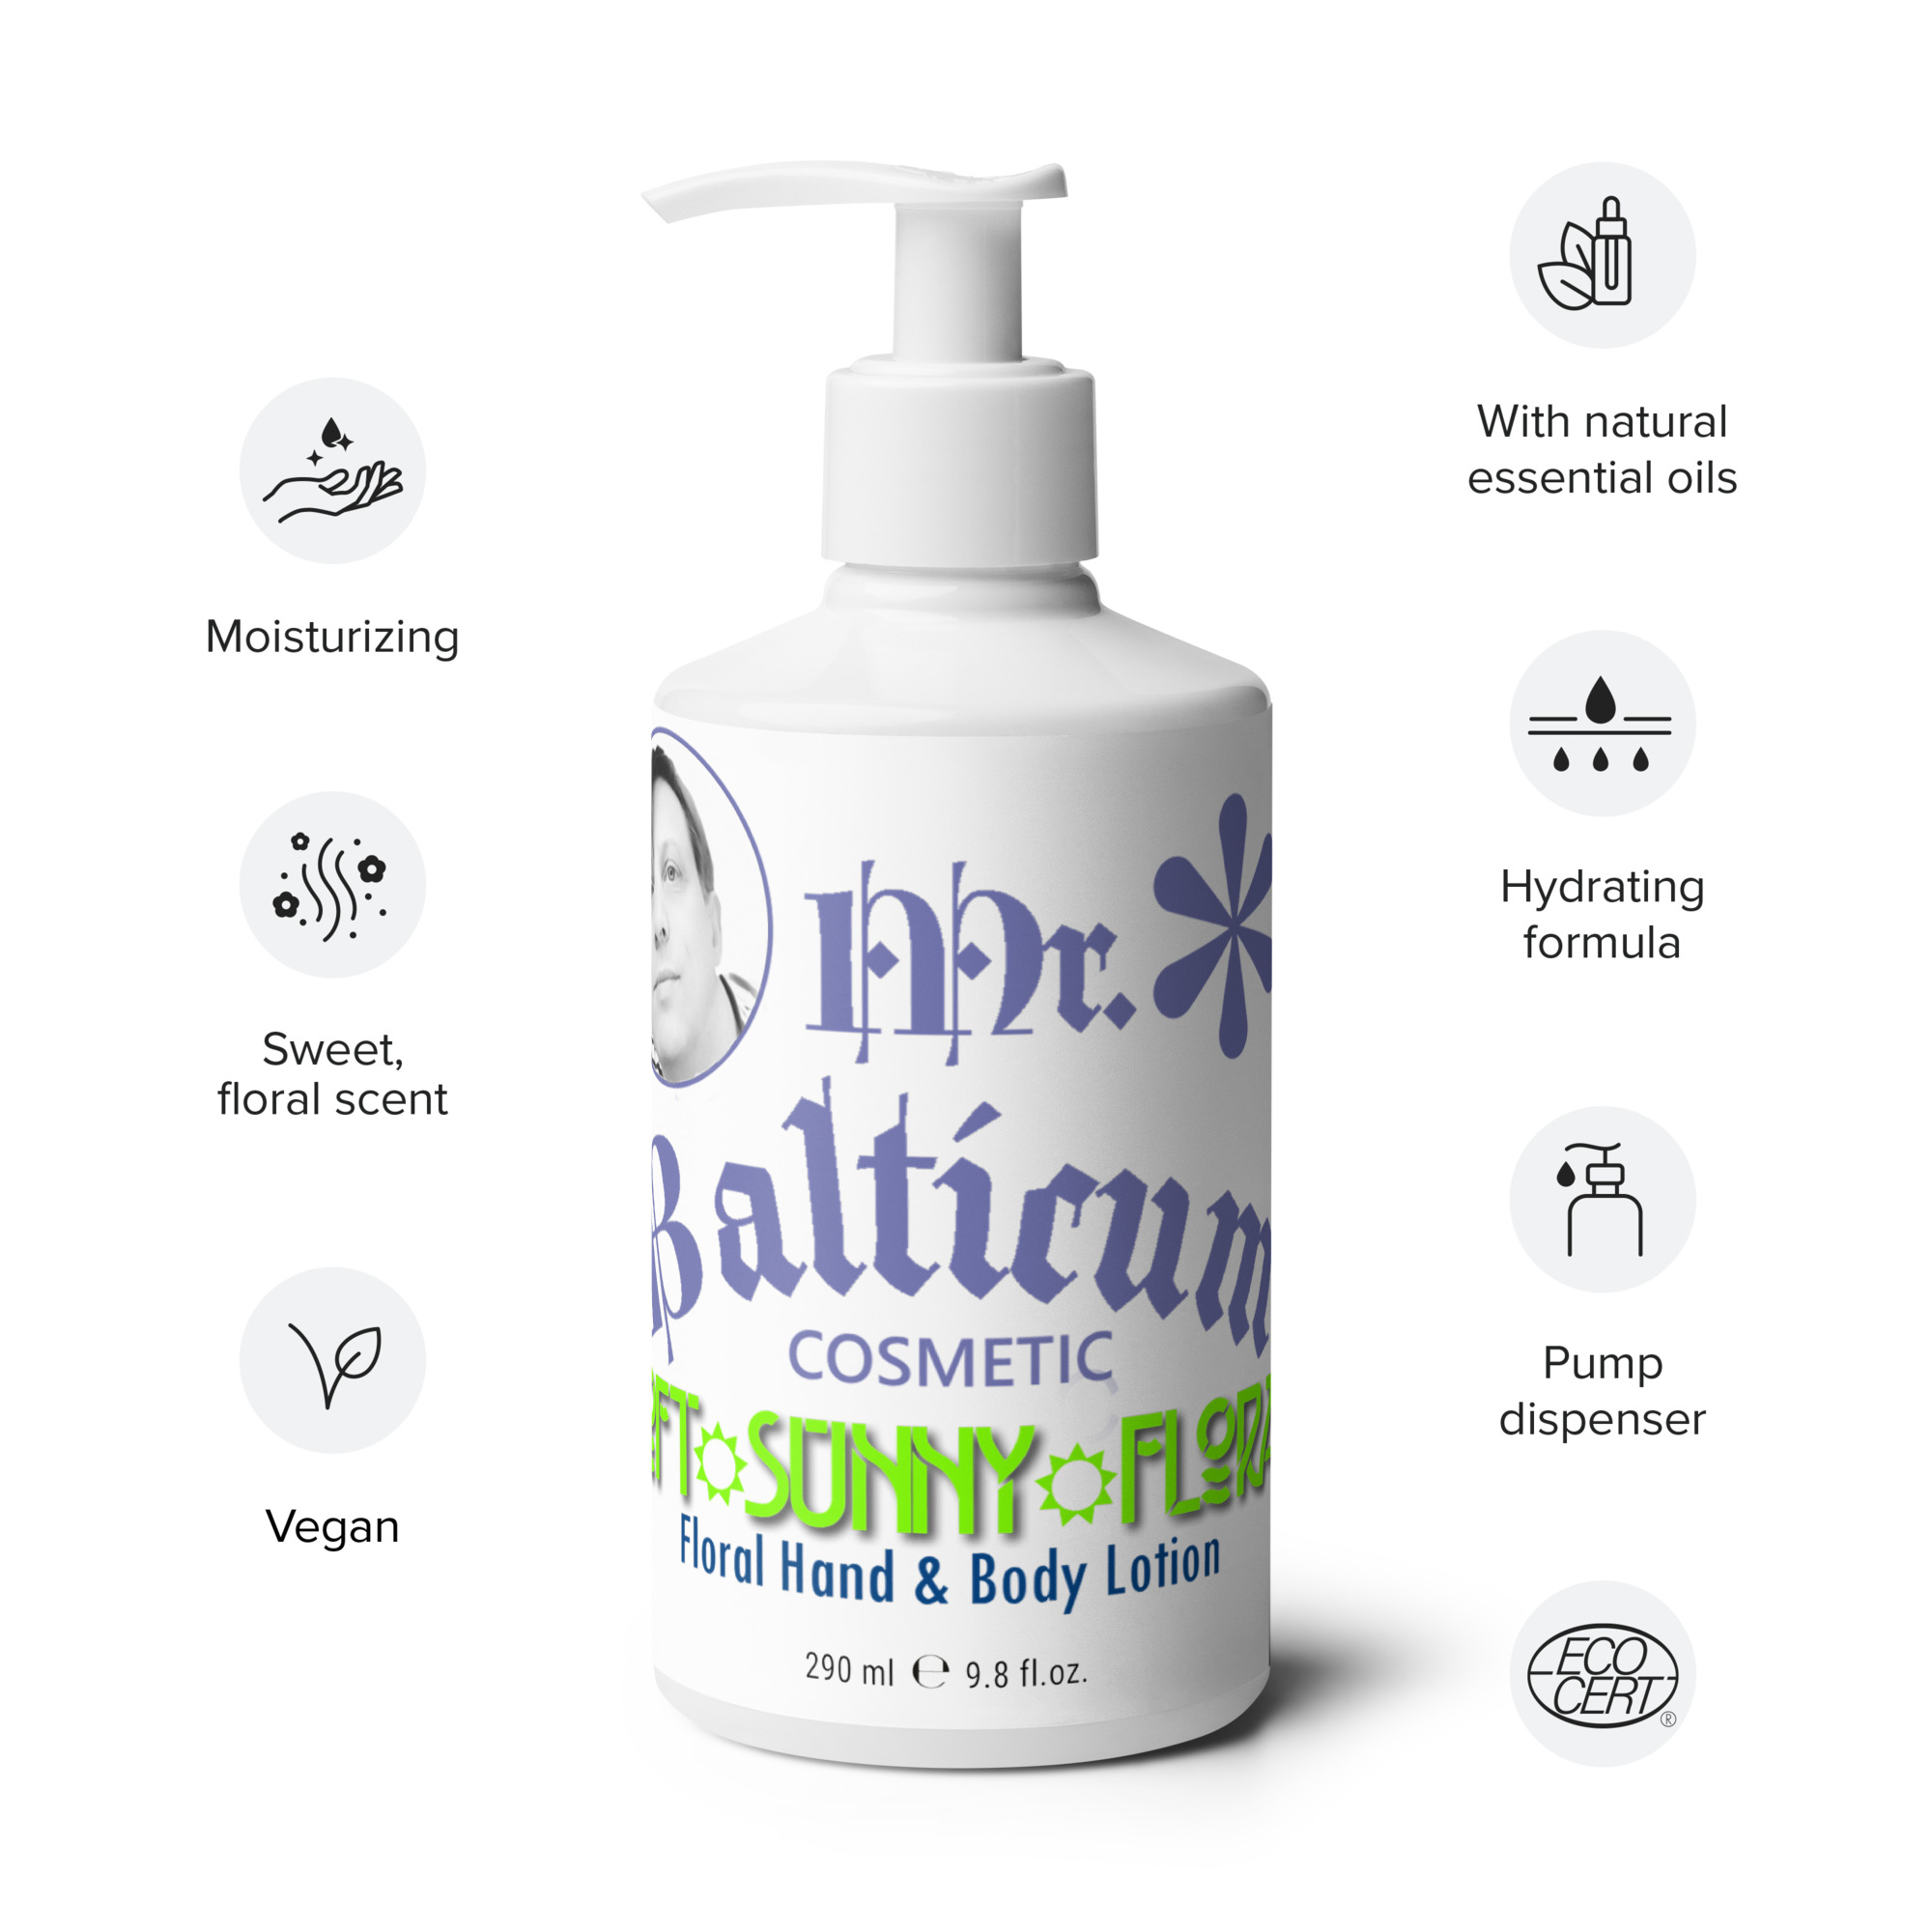 Mr. Balticum — Floral Hand & Body Lotion